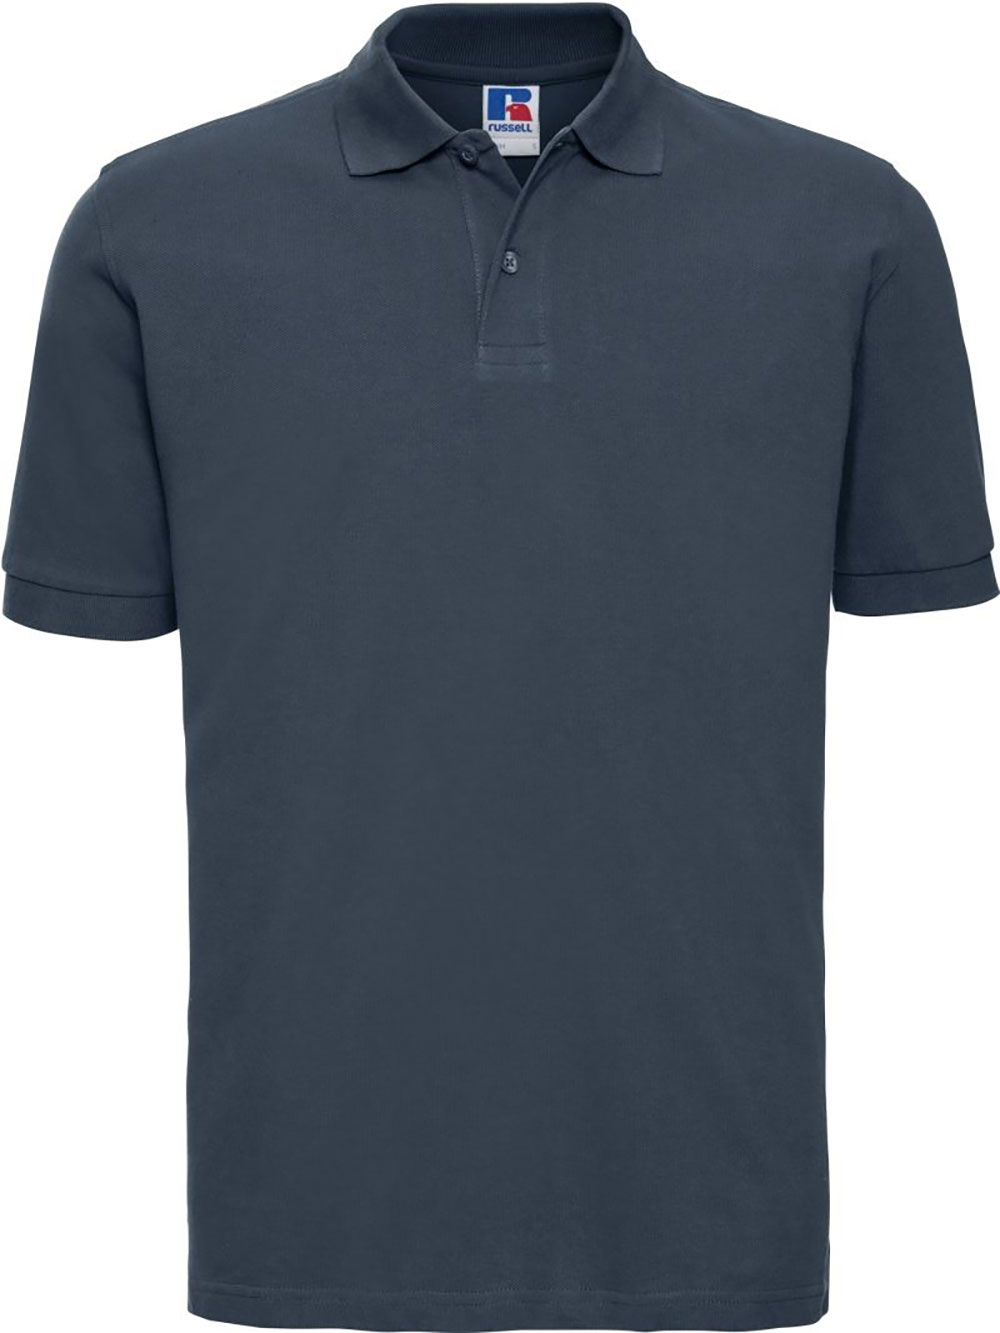 Russell 569M Poloshirt Baumwolle / french navy